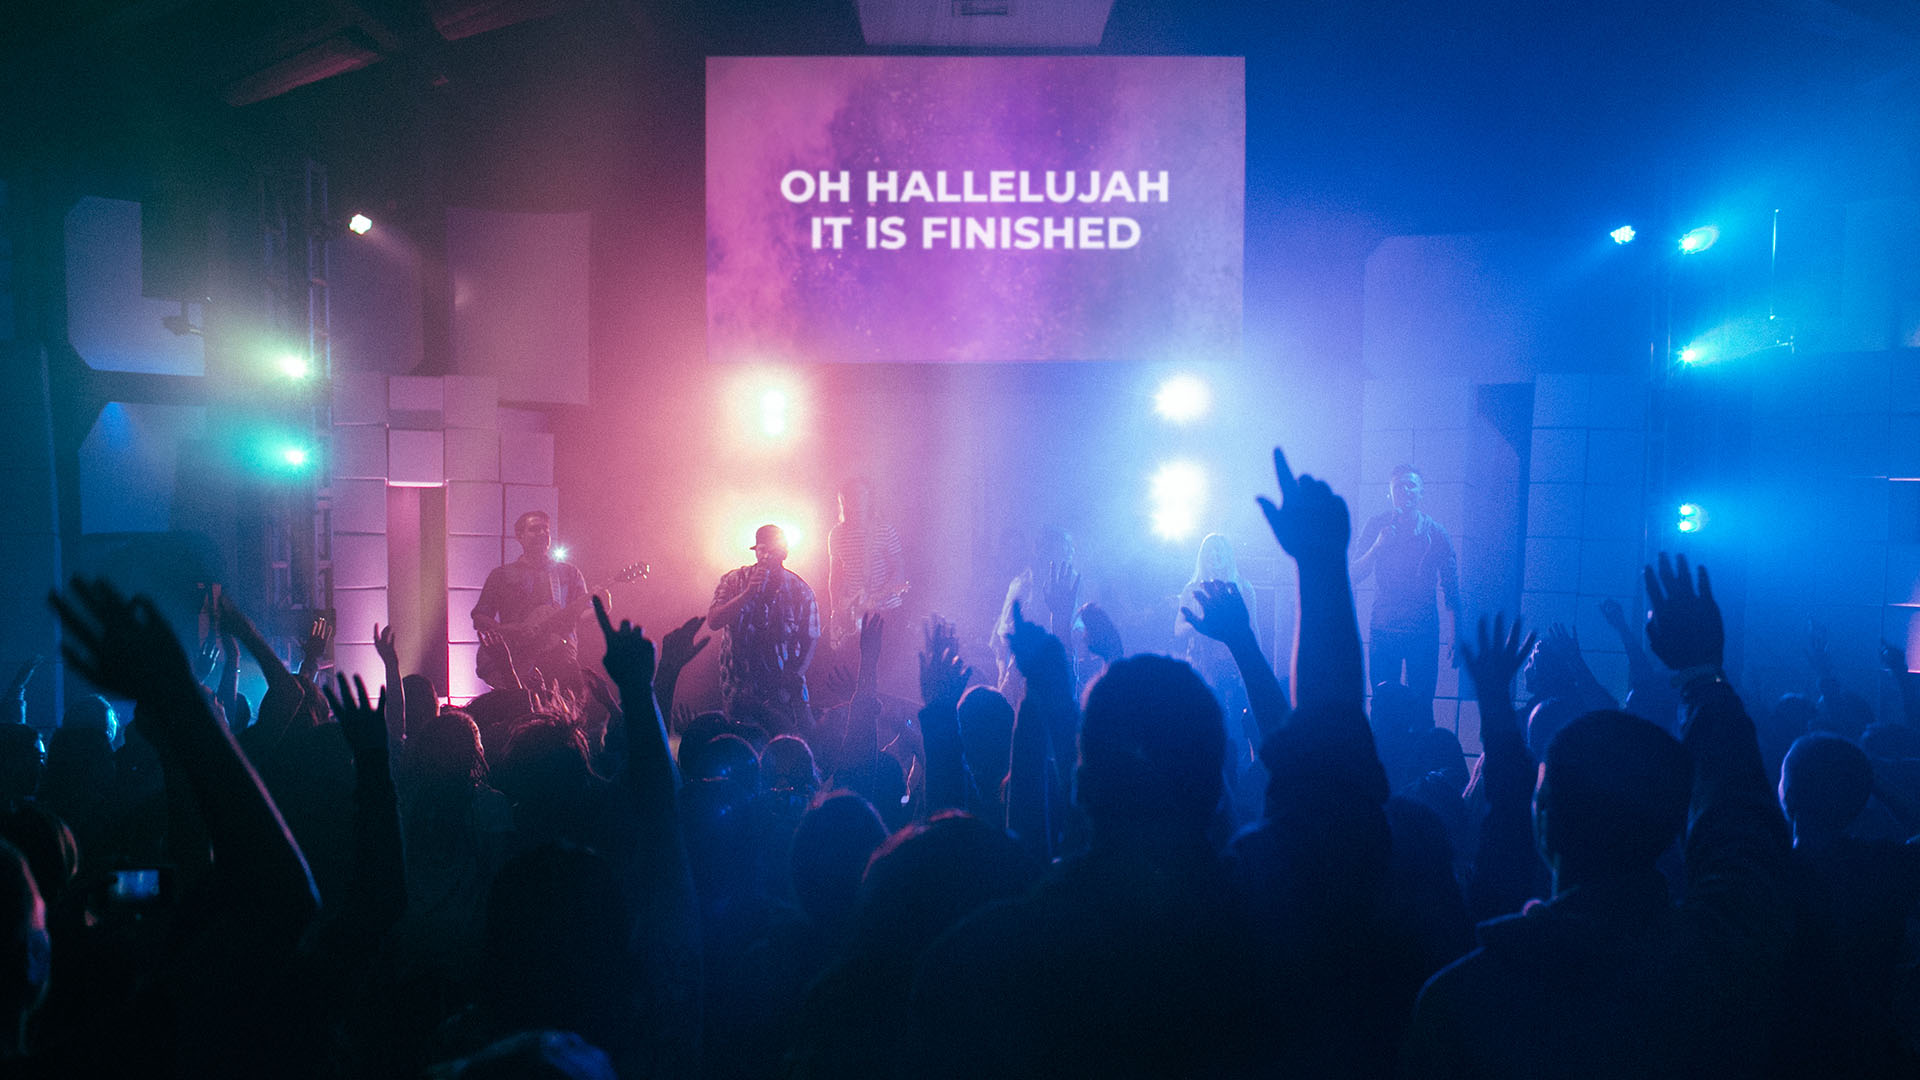 We’ve Handpicked Backgrounds for the Top 10 Worship Songs of Easter 2022